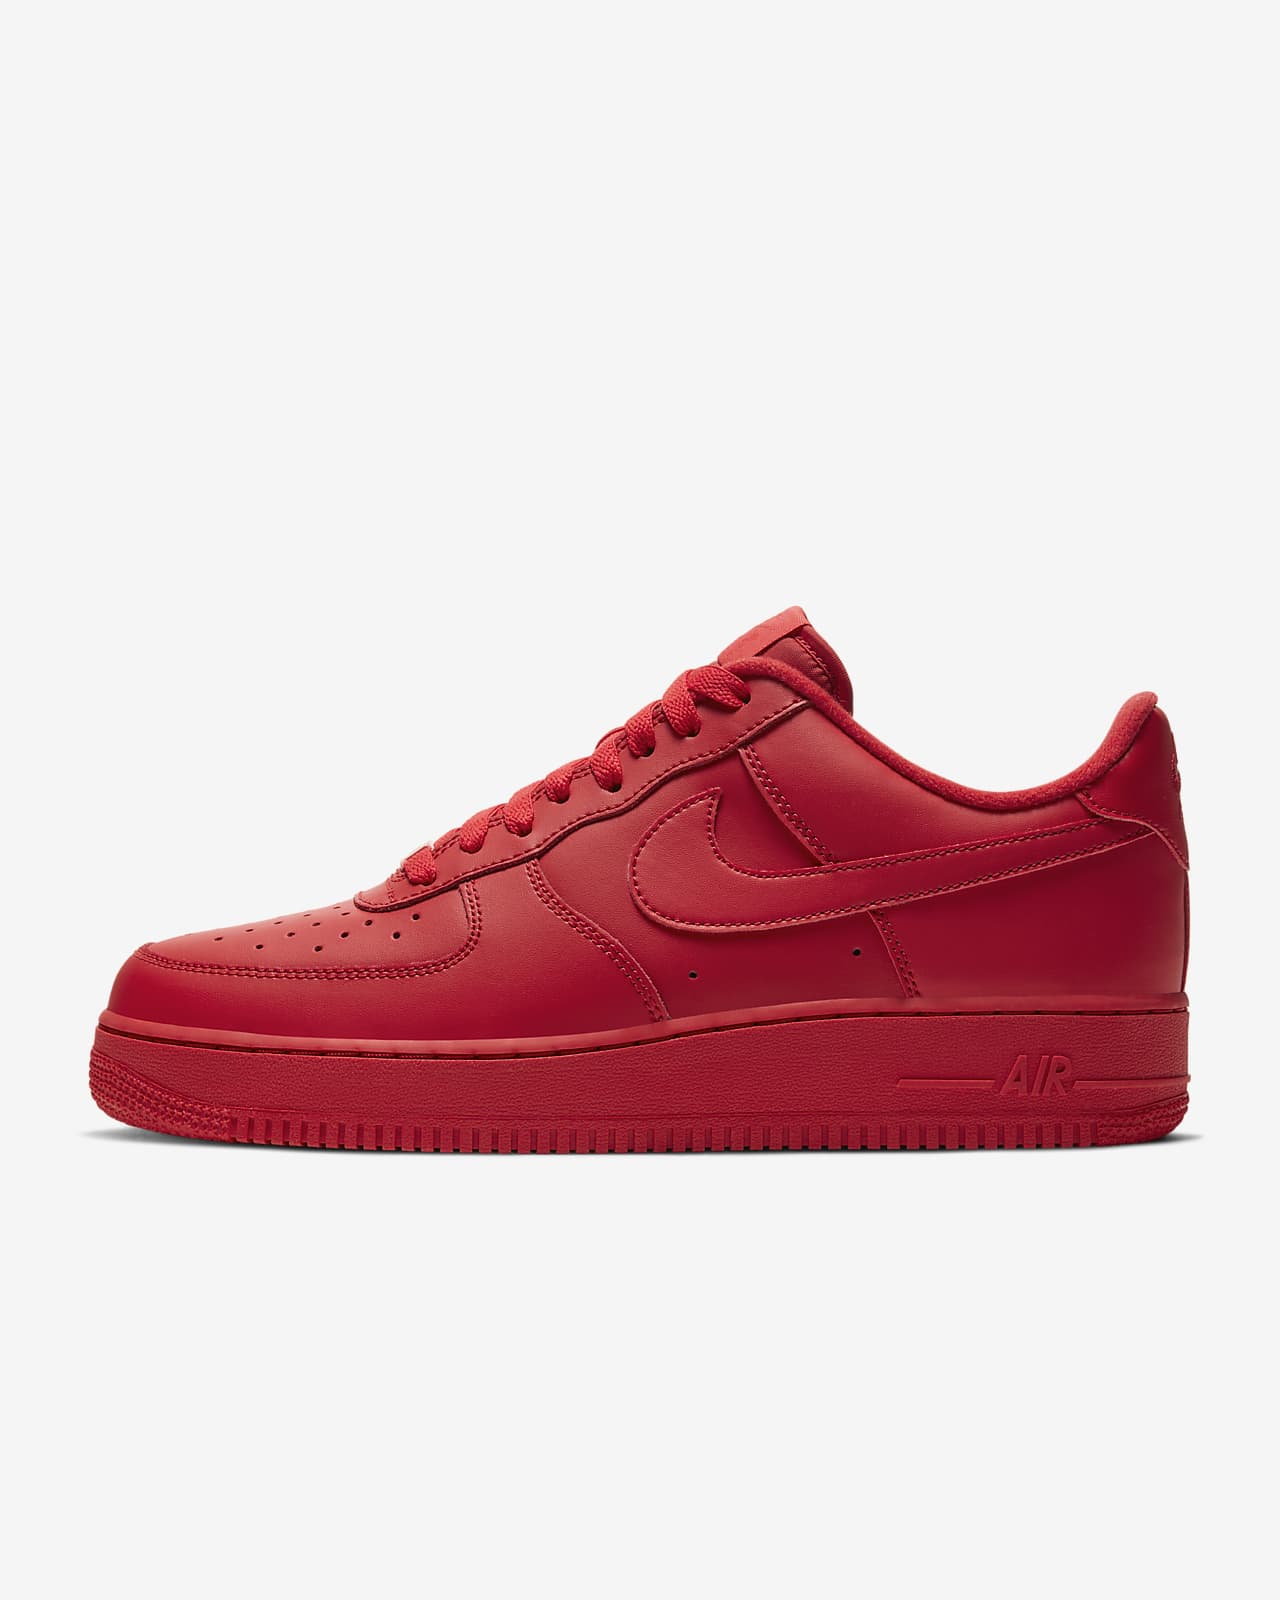 Nike Air Force 1 ’07 LV8 1 ‘University Red’